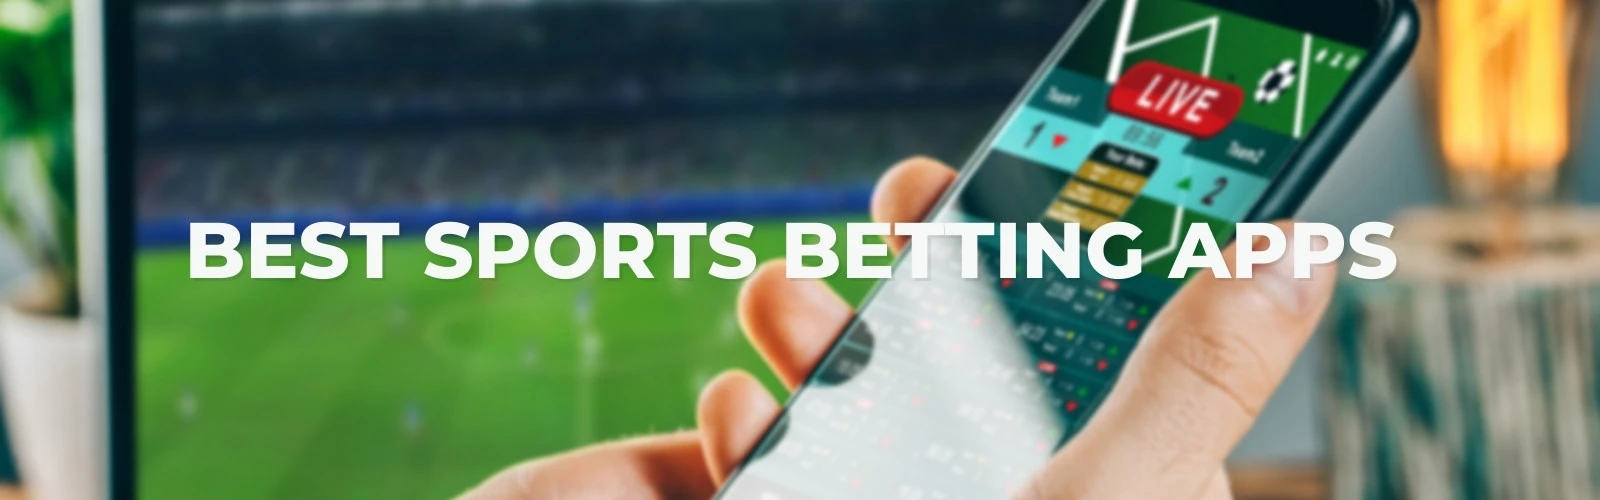 Best betting apps in the UK